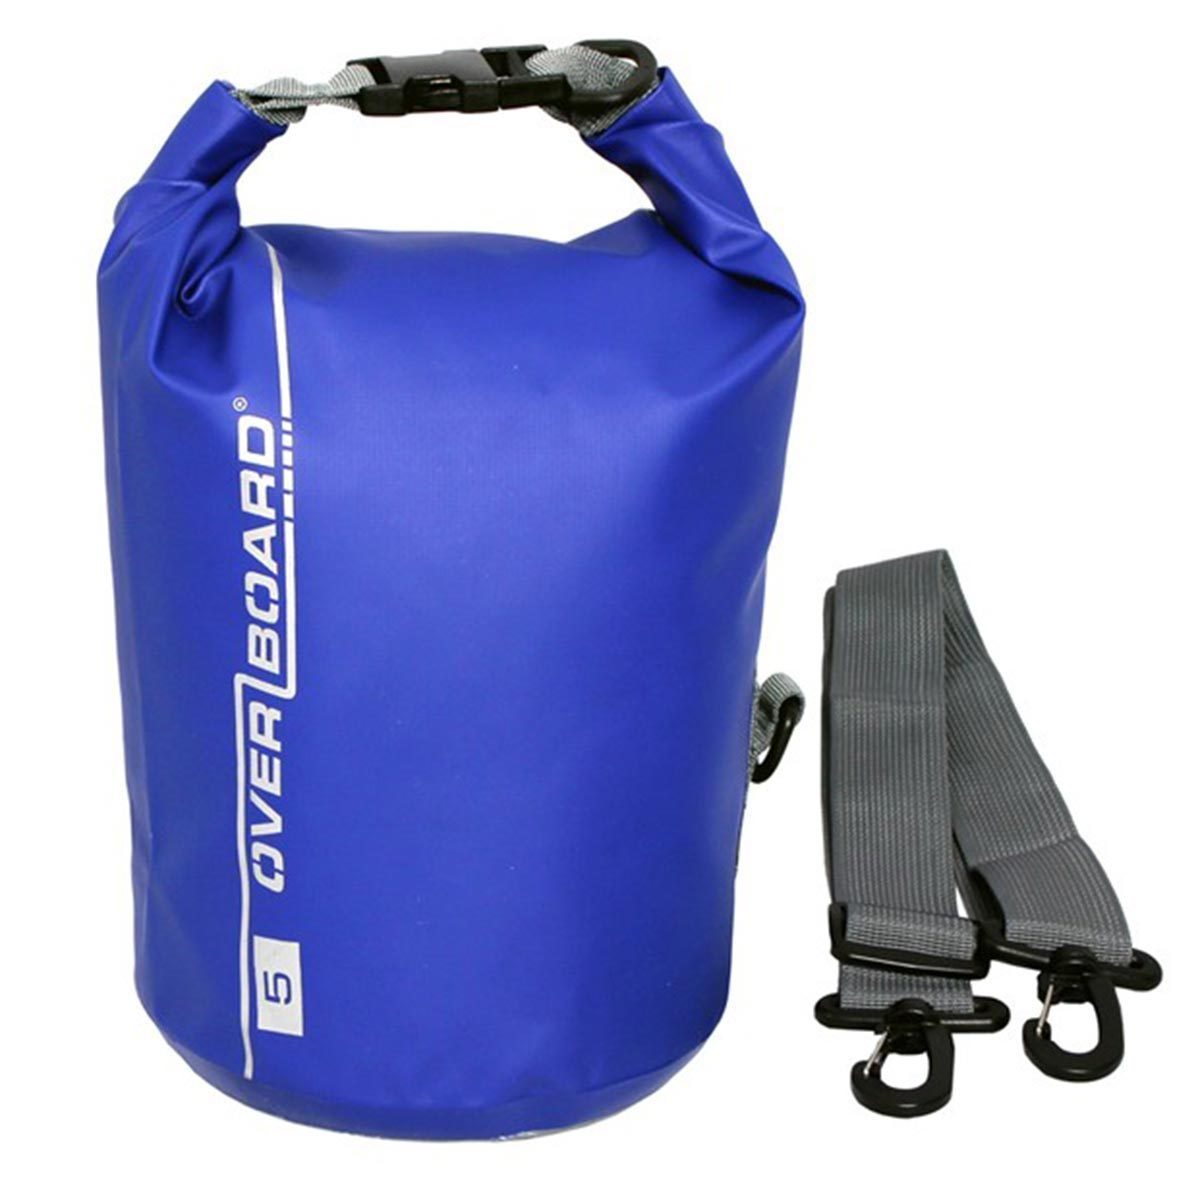 Overboard 5 Litre Dry Tube Bag Bags, Packs and Cases Overboard Blue Tactical Gear Supplier Tactical Distributors Australia